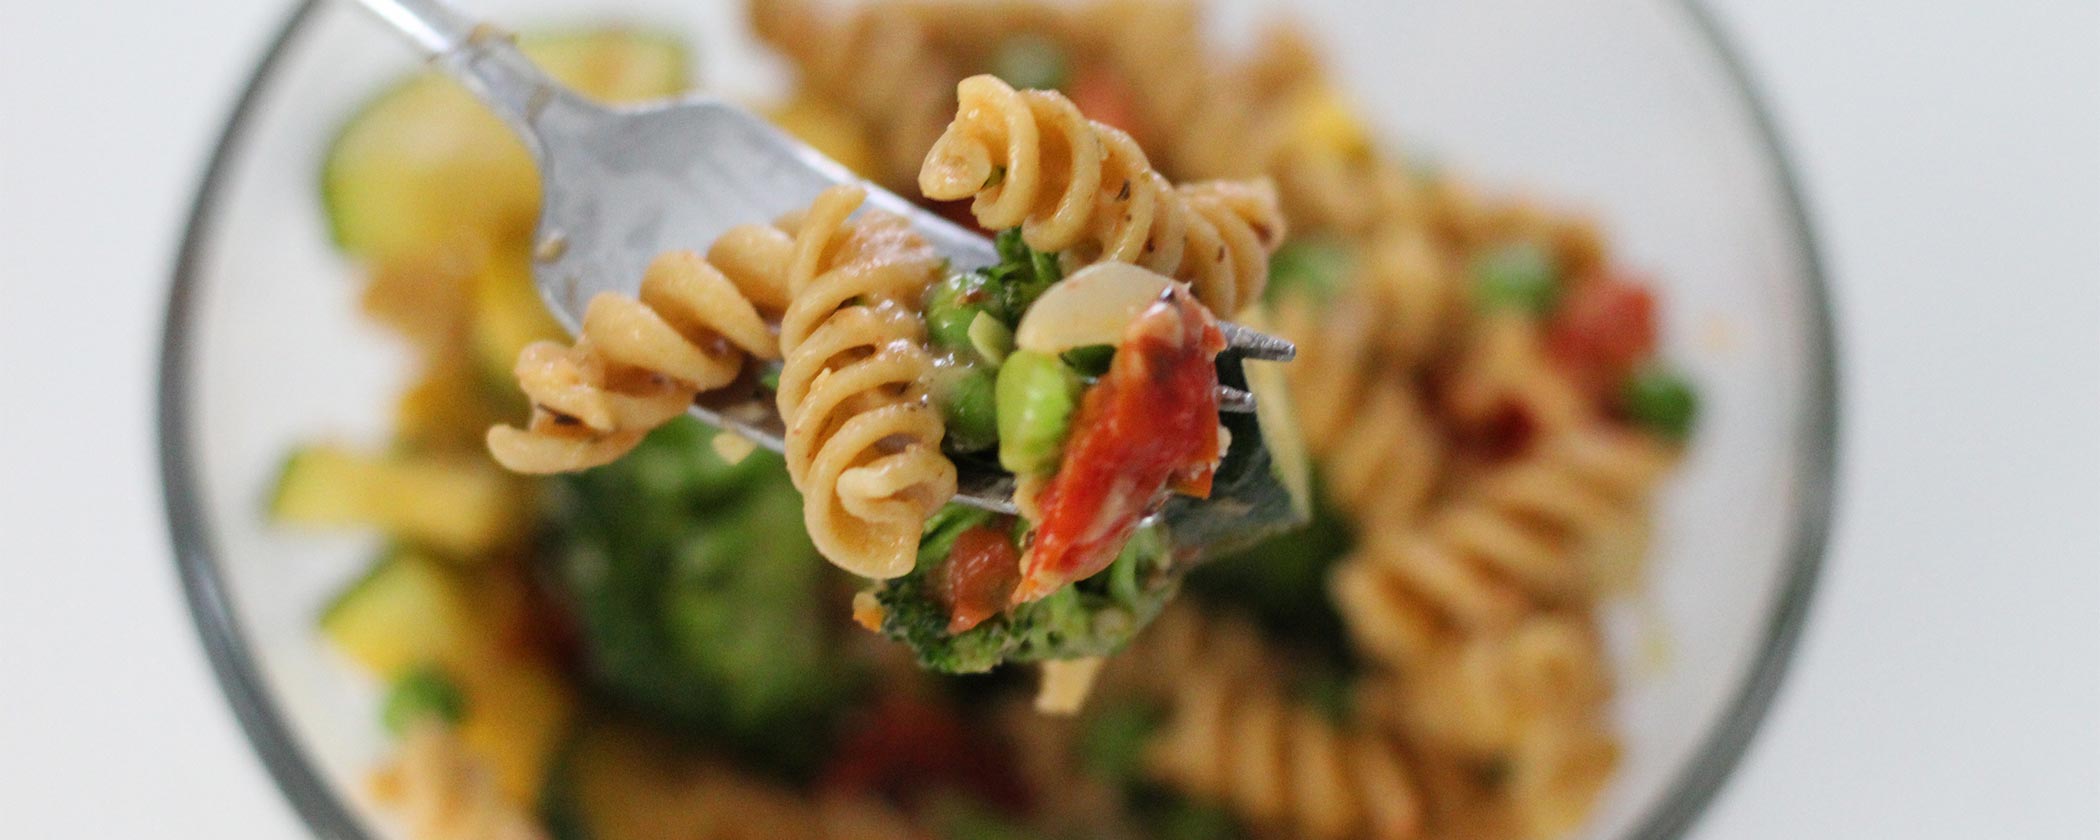 featured image for Mainely Dish Recipe Video: Cheesy Pasta with Summer Veggies